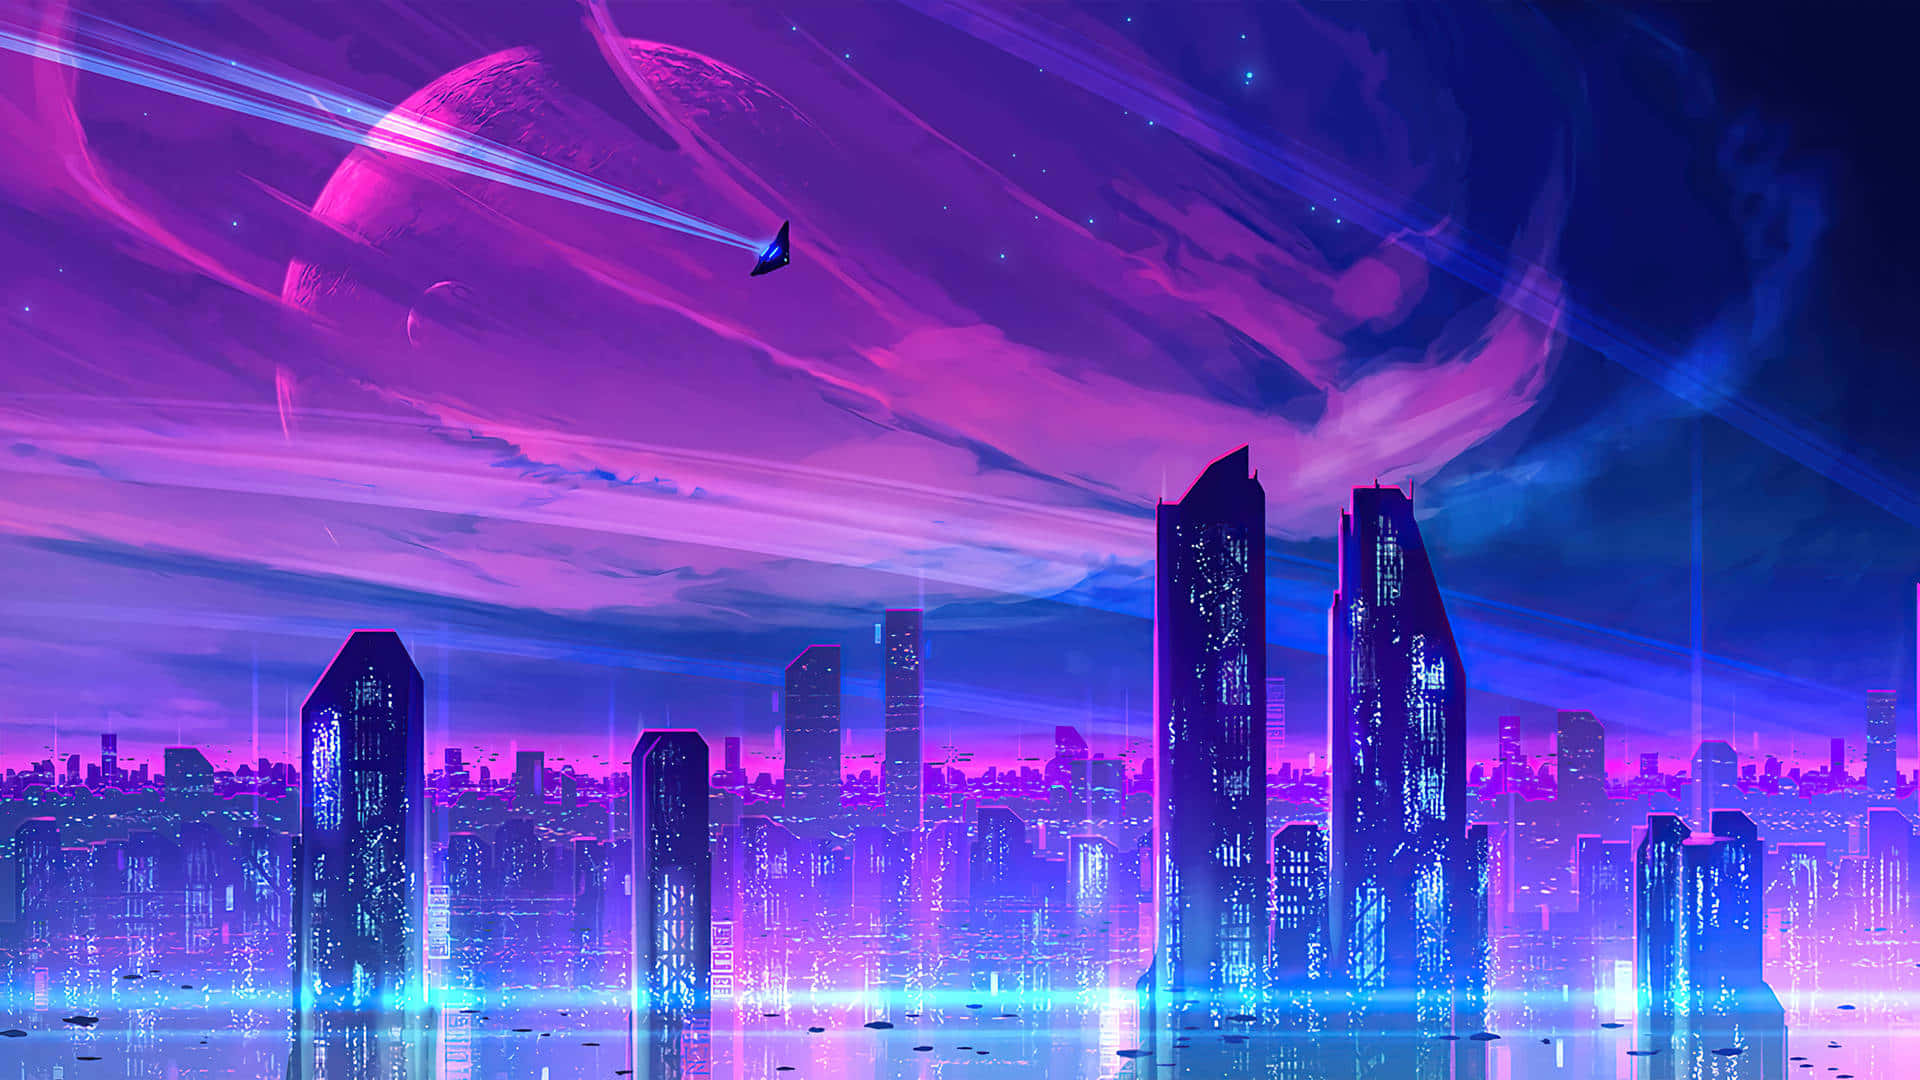 A Futuristic City With Purple Lights And Buildings